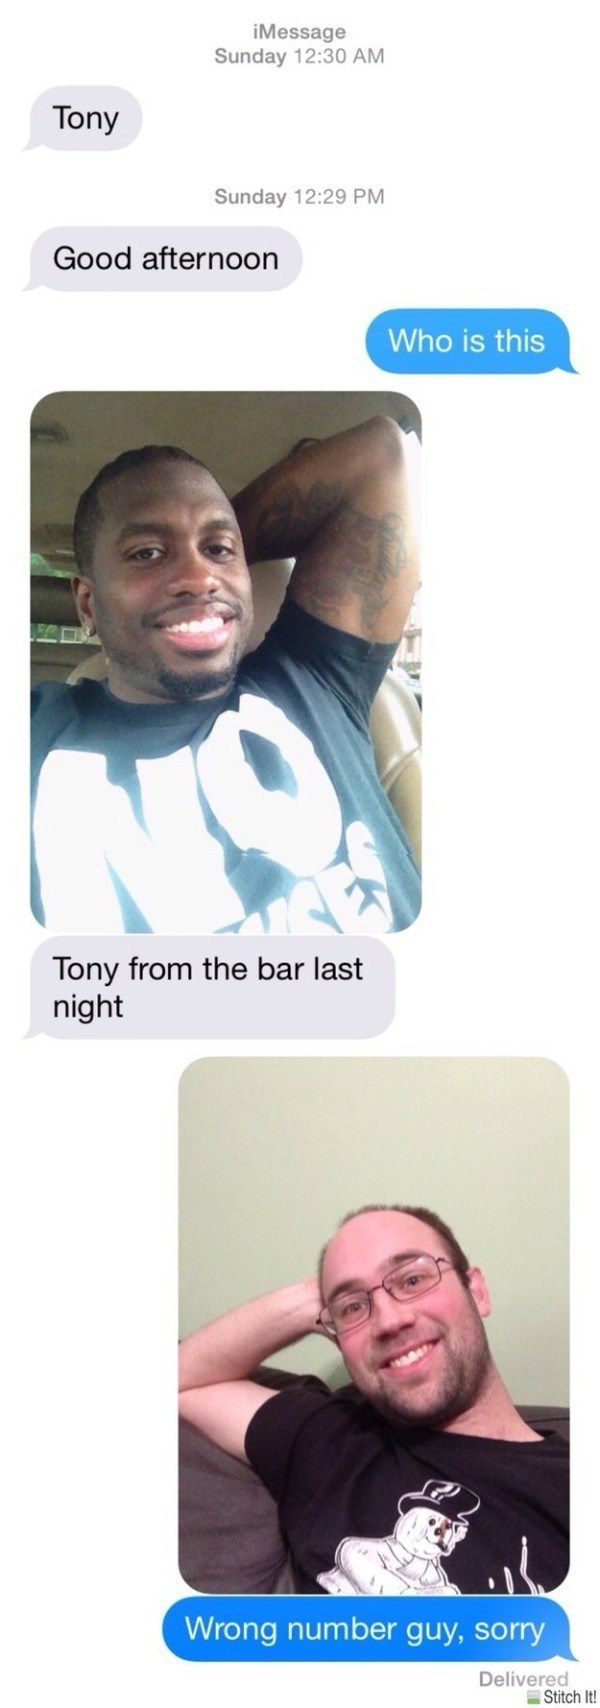 wrong number black guy - iMessage Sunday Tony Sunday Good afternoon Who is this Tony from the bar last night Wrong number guy, sorry Delivered Stitch It!